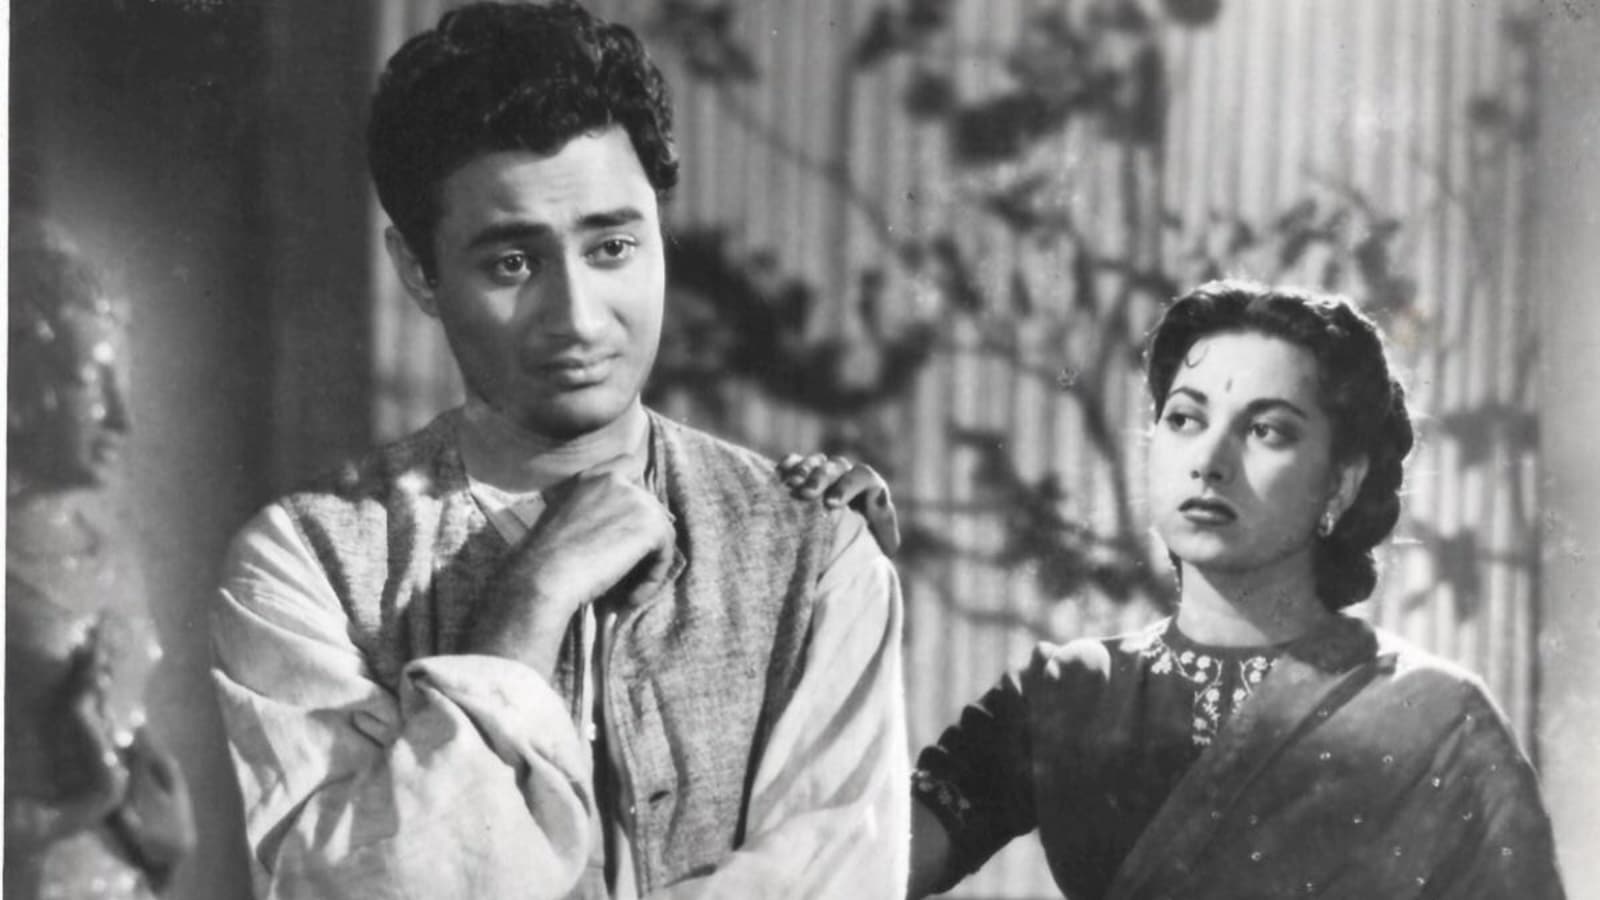 When Dev Anand talked about losing his first love Suraiya Bollywood photo